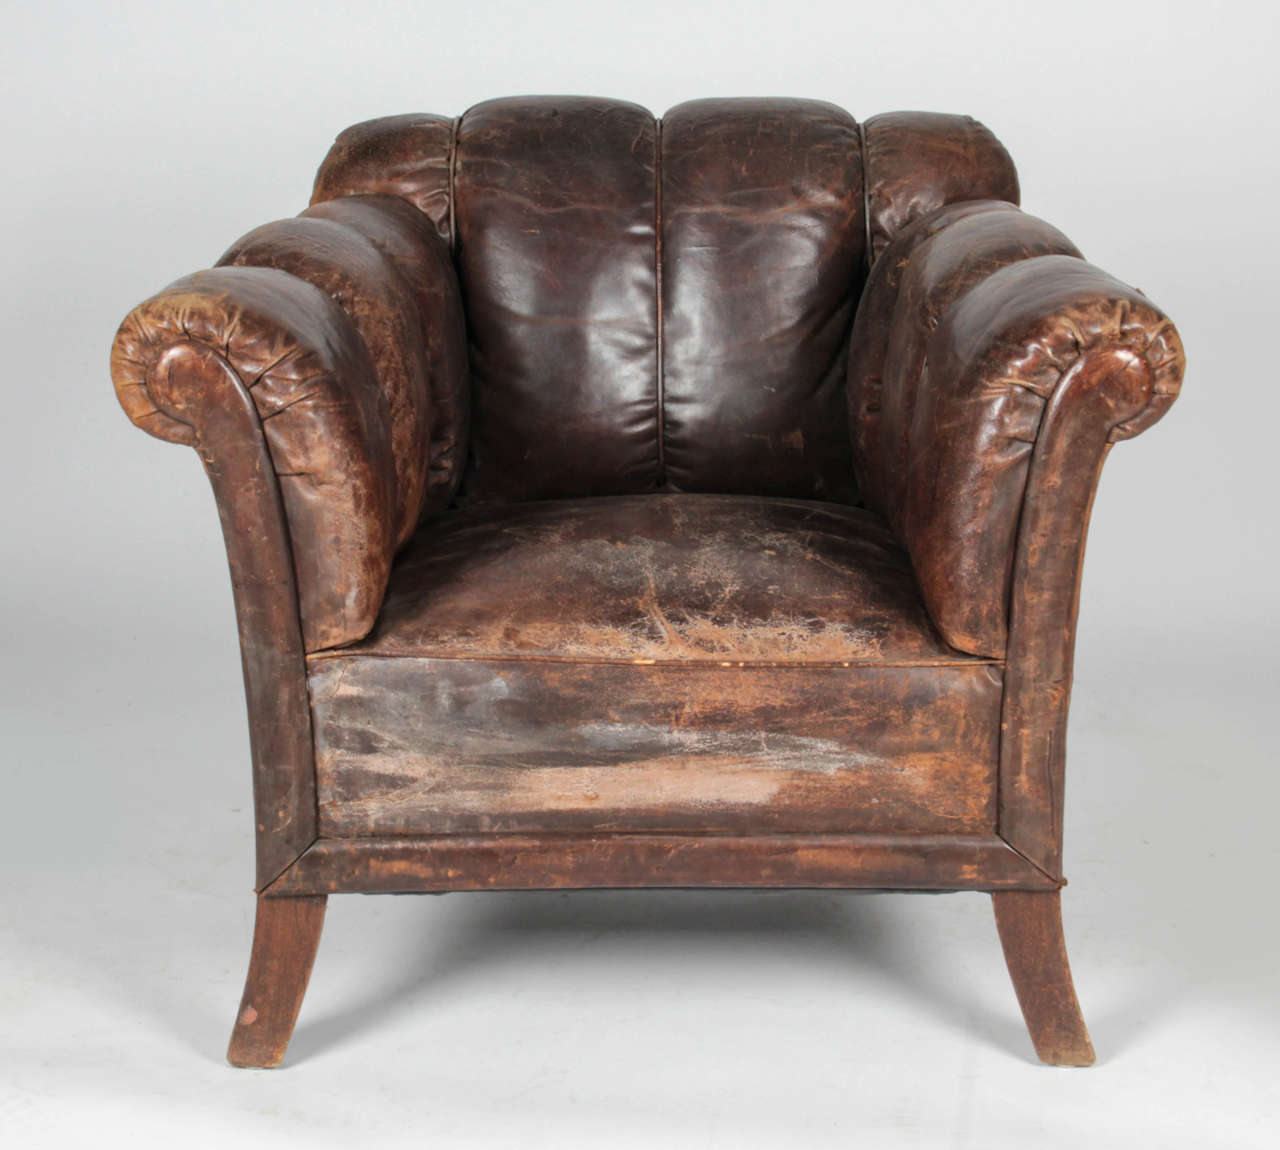 Worn leather club chairs with vertical tufting and piping. Tears in leather on one side and at the back (see pictures). Leather-wrapped nailheads accent the back edges.

Not available for sale or to ship in the state of California.